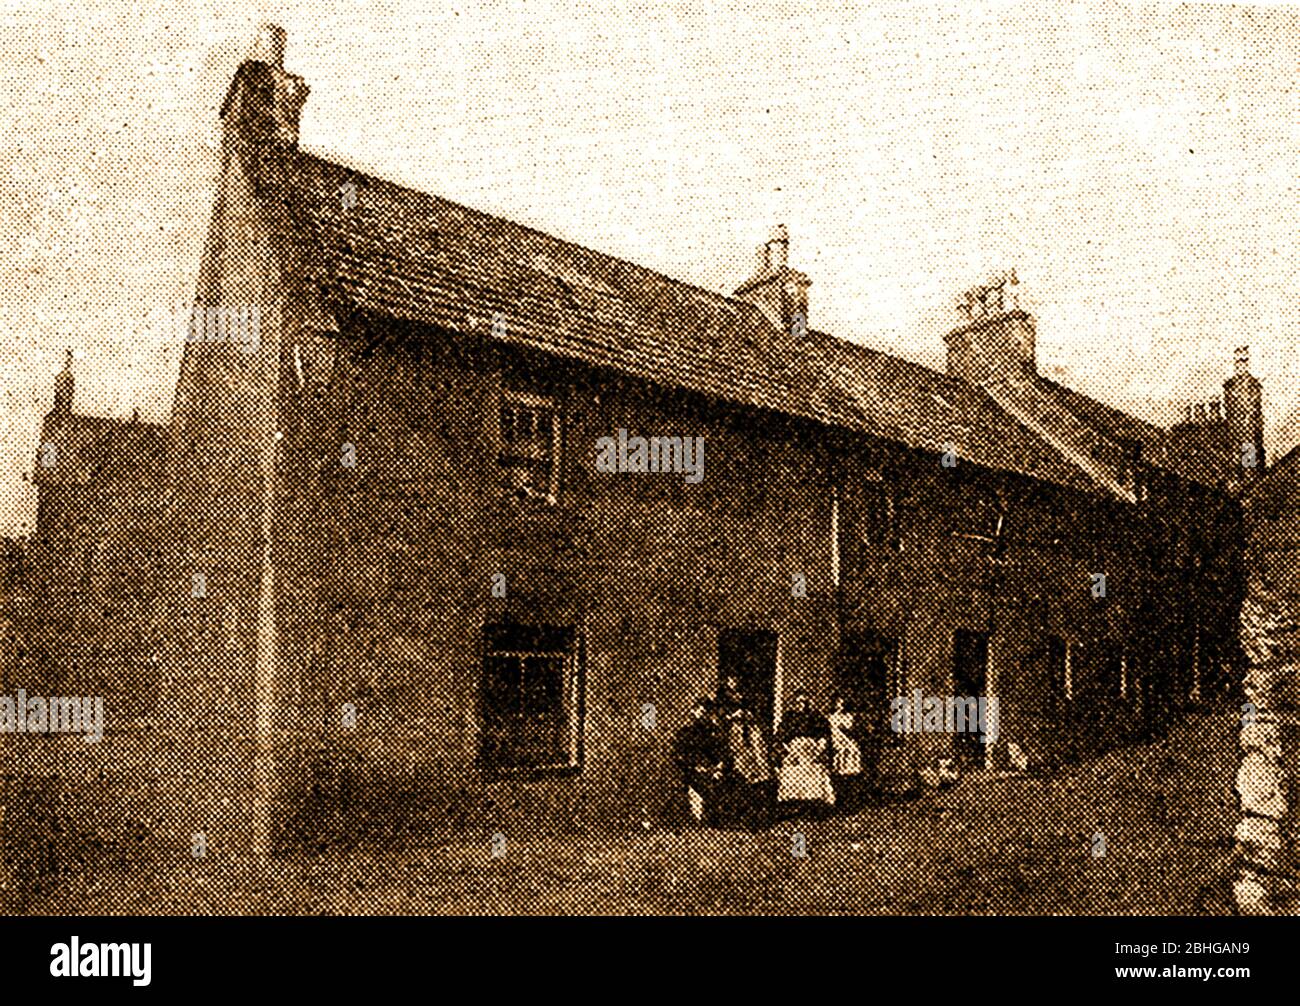 An old printed image (the earliest known) of J M Barrie's birthplace and home at  9 Brechin Road in the weaving town of  Kirriemuir ( his fictional Thrums), Forfarshire, Scotland - Sir James Matthew Barrie, 1st Baronet (1860-1937), was a writer, dramatist and story teller who is best known for his novel of Peter Pan, The Boy Who Wouldn't Grow Up (inspired by the death of his young brother). Before his death, he gave the rights and royalties from all  Peter Pan works to Great Ormond Street Hospital for Children in London. It continues to benefit from them today. Stock Photo